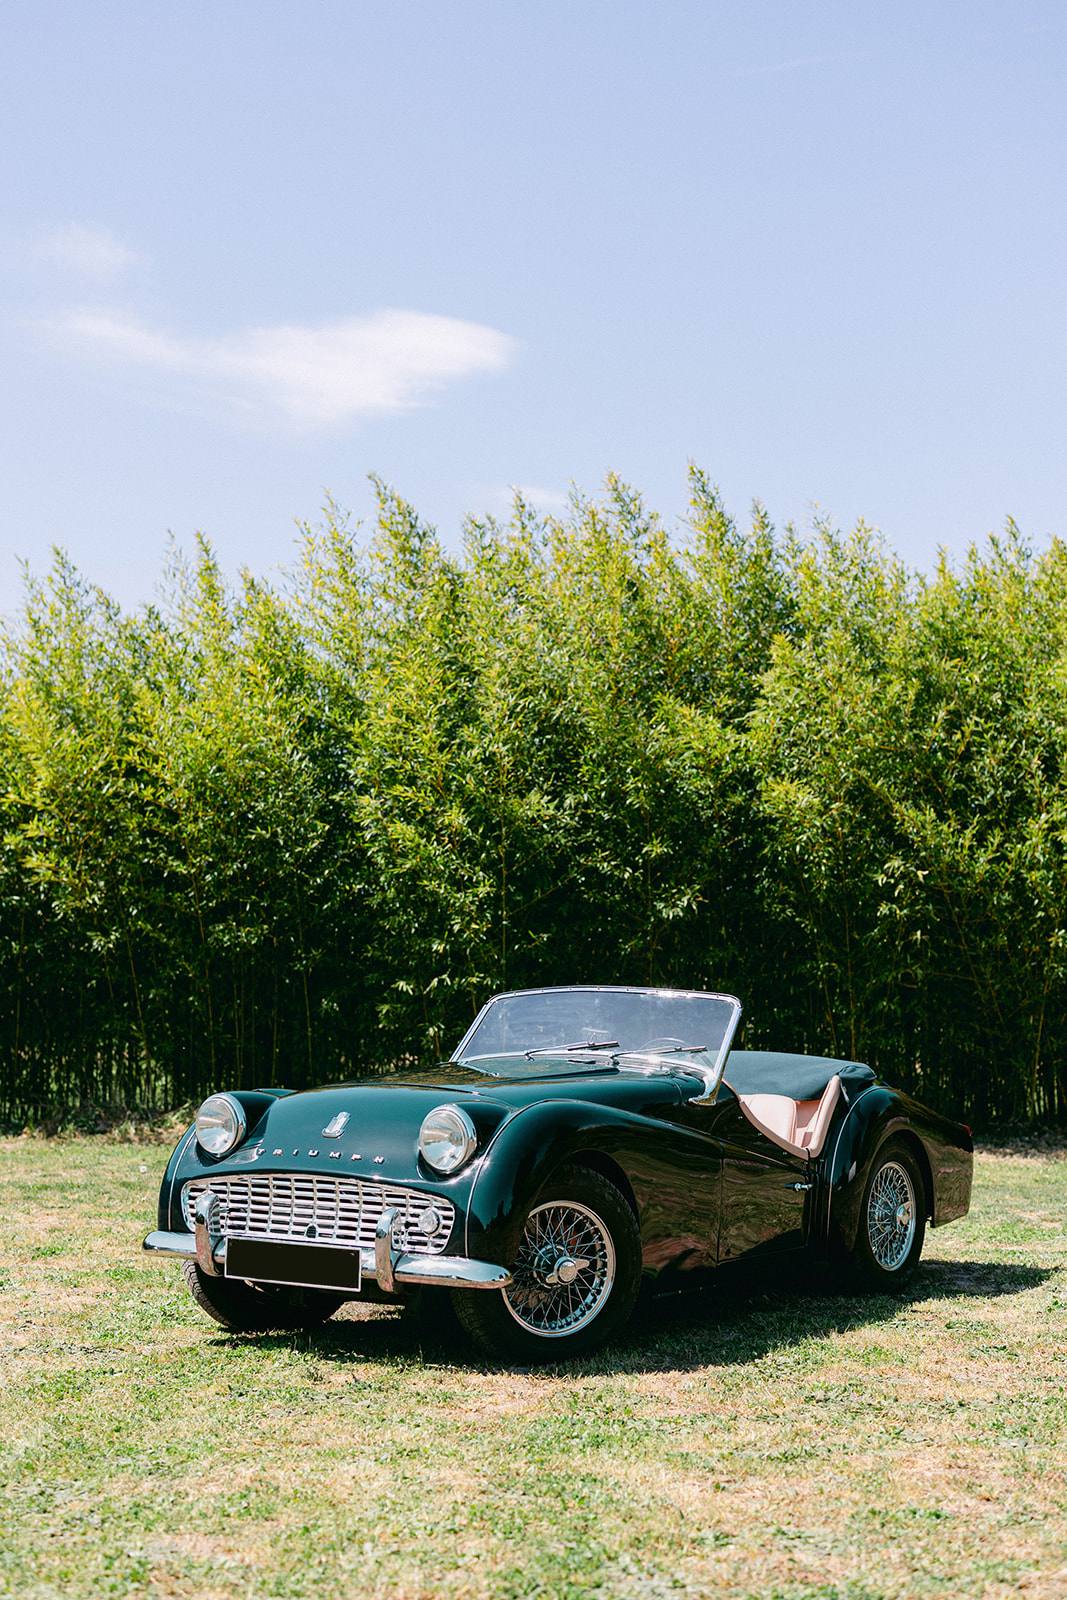 A photopraph of one of the vehicles available for weddings at Provence Classics.